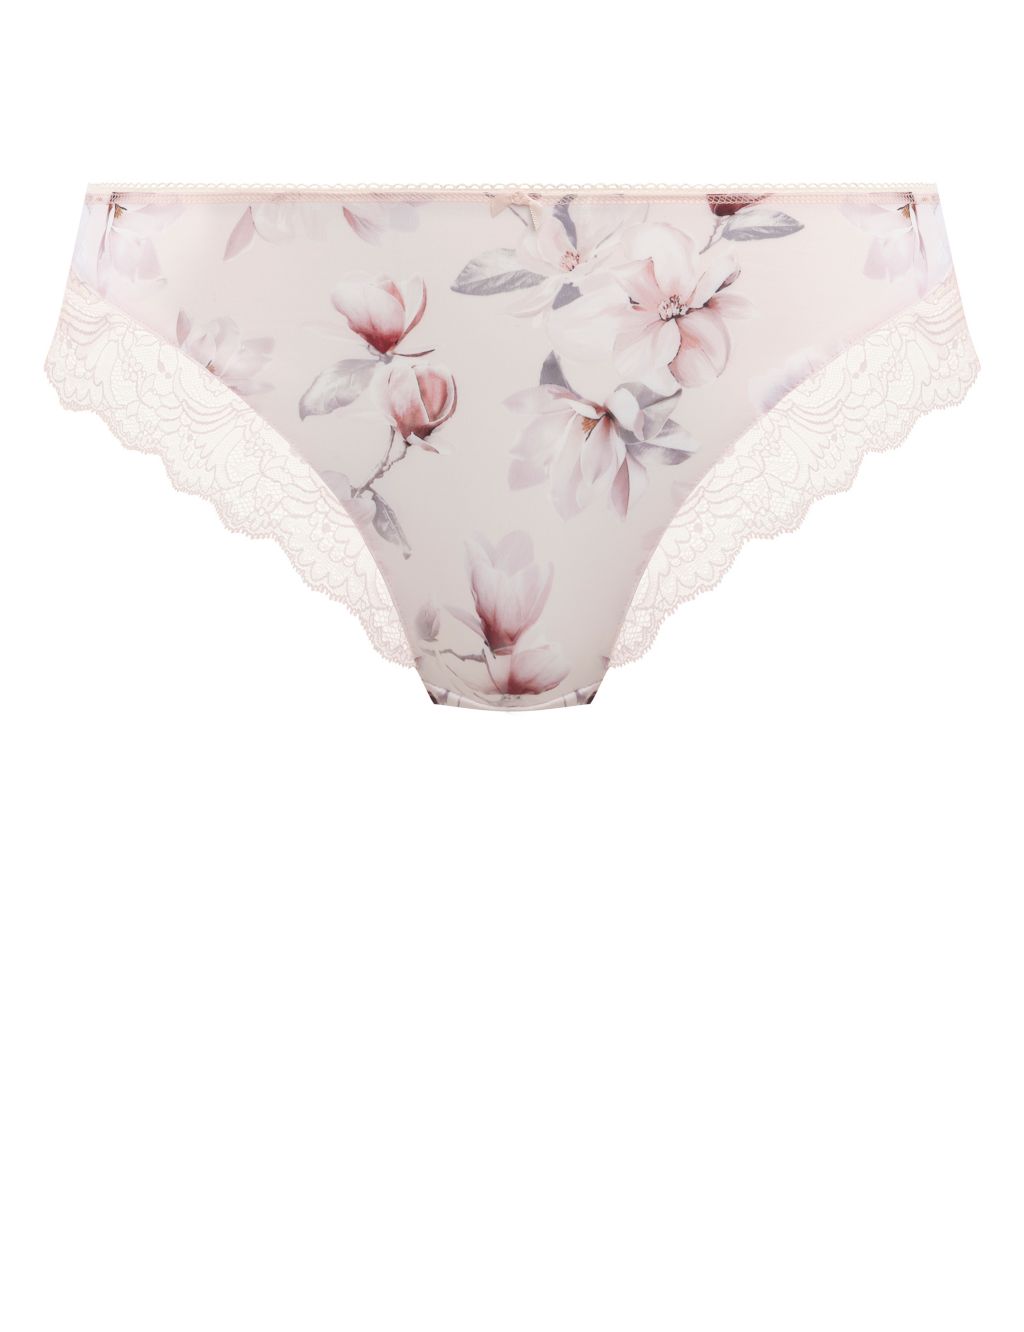 Lucia Lace Floral Knickers | Fantasie | M&S